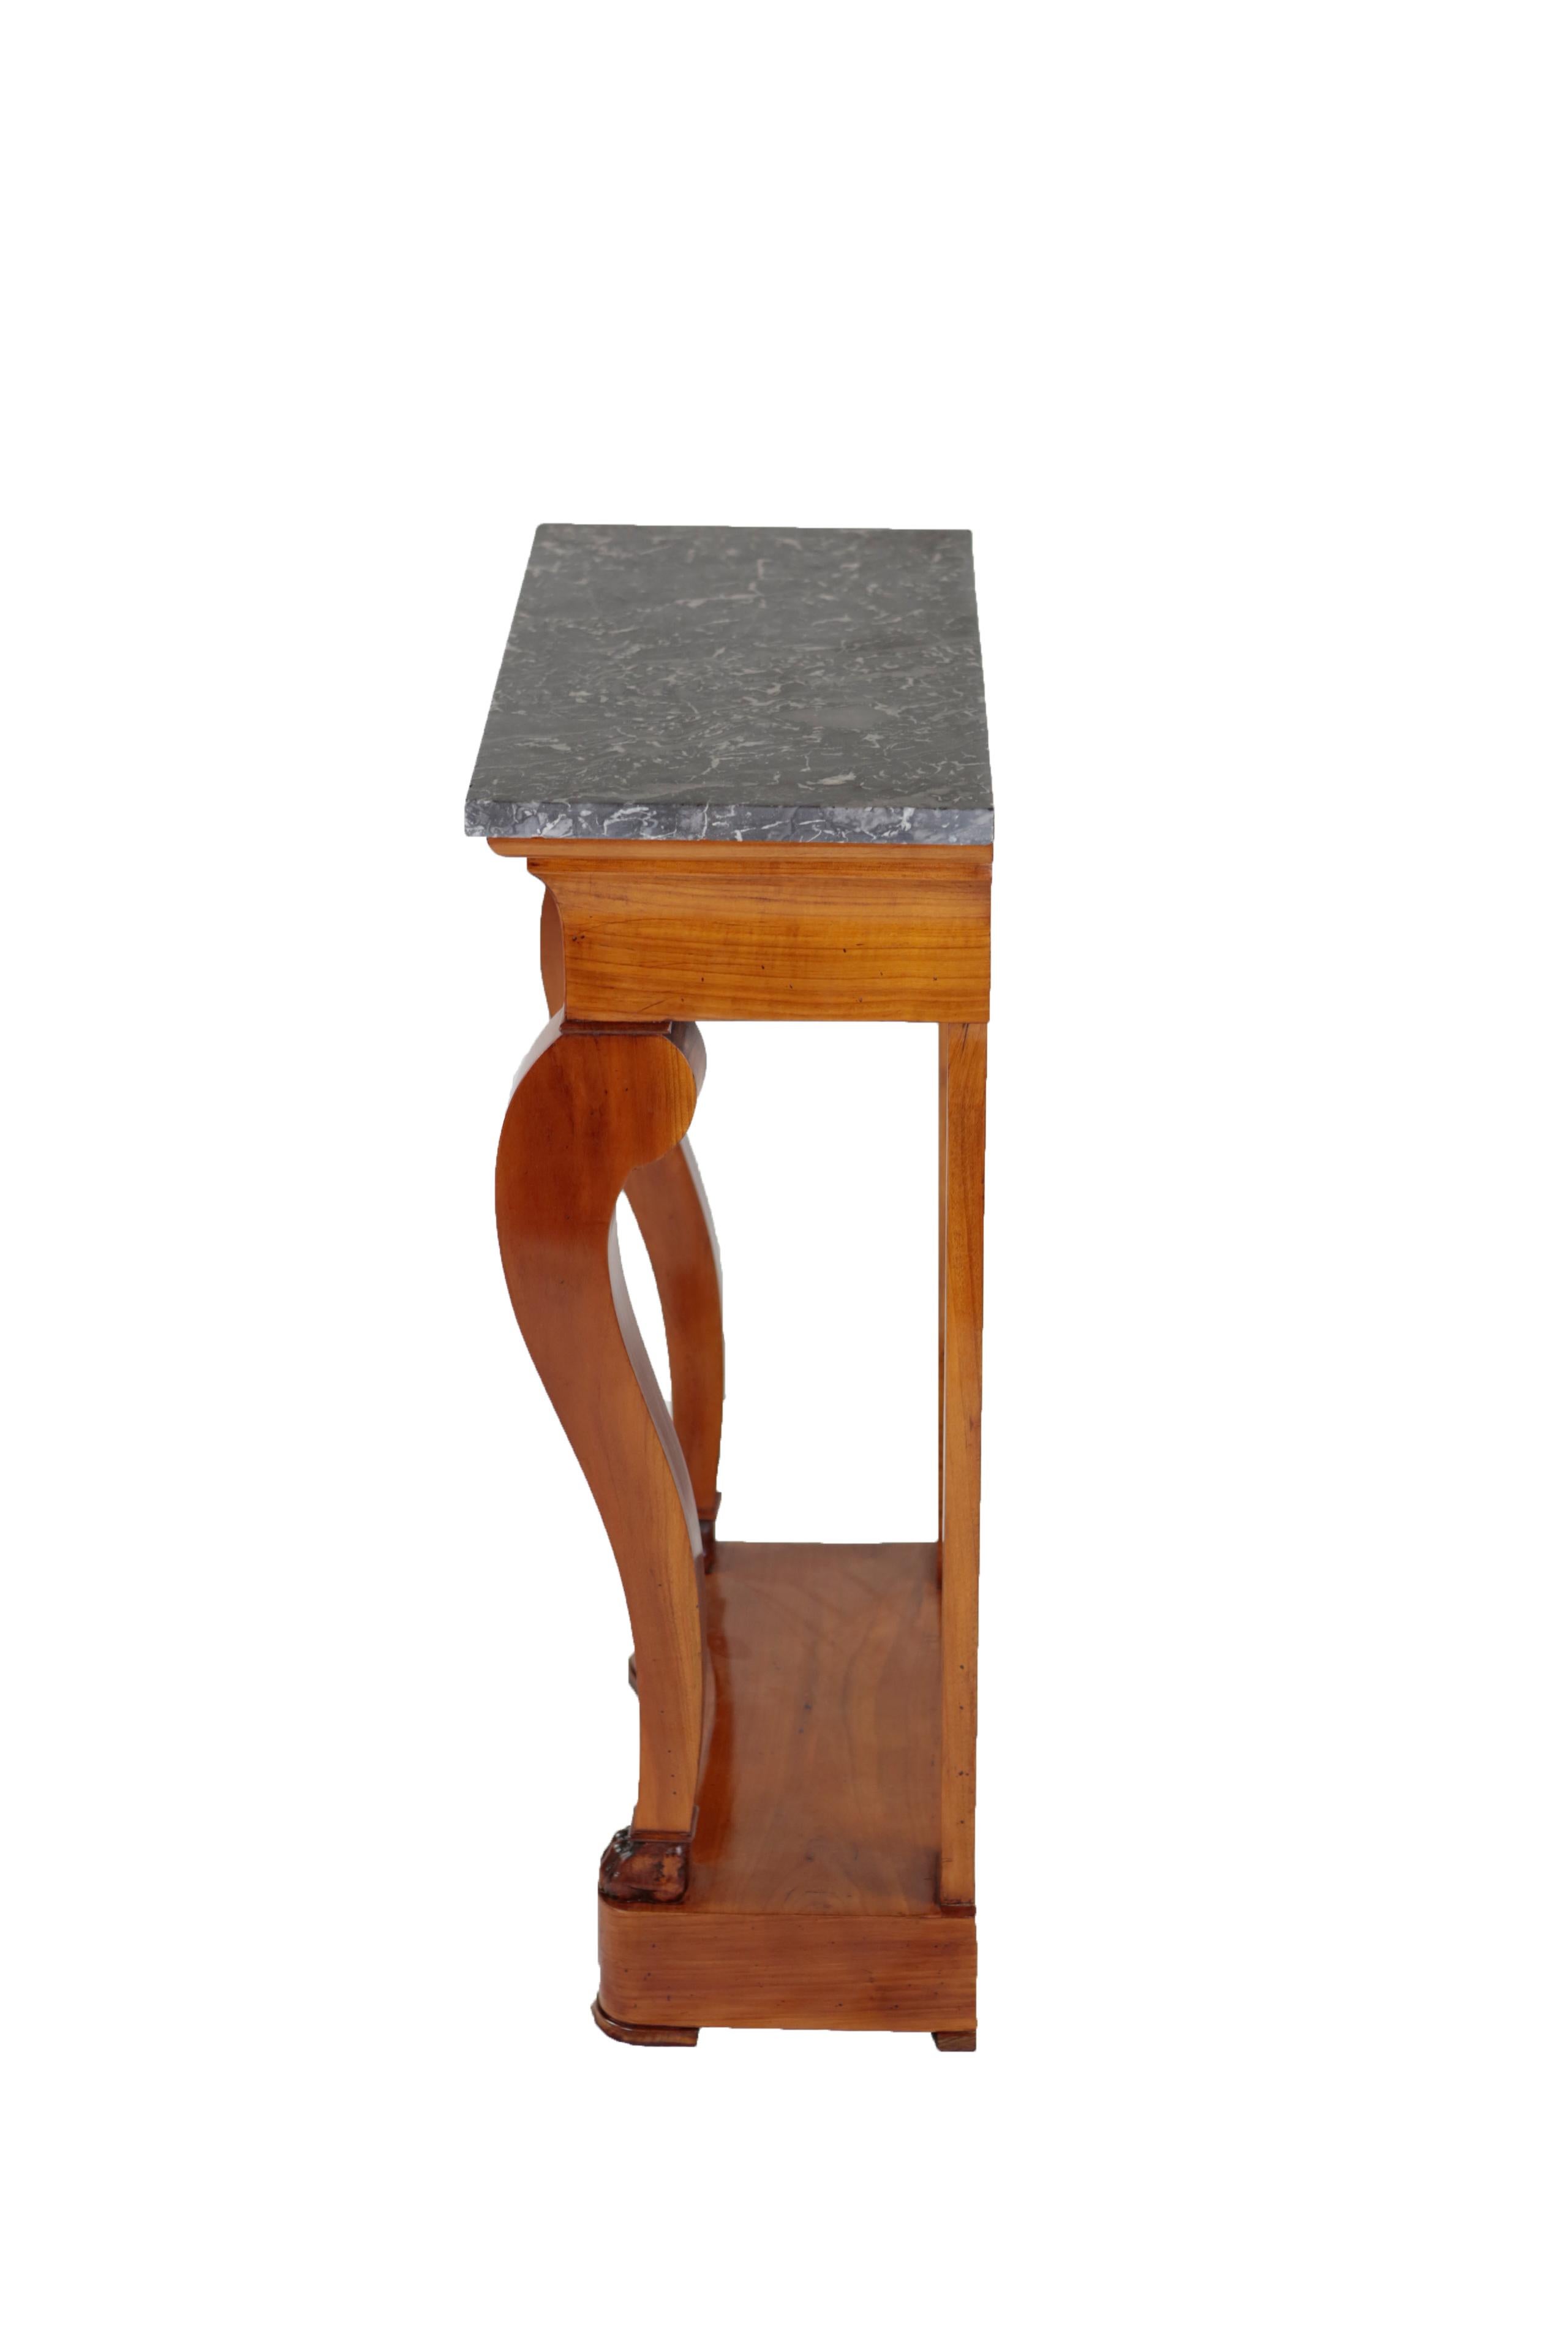 19th Century Biedermeier Period Console Table with Marble Top, Cherrywood Veneer In Good Condition For Sale In Muenster, NRW